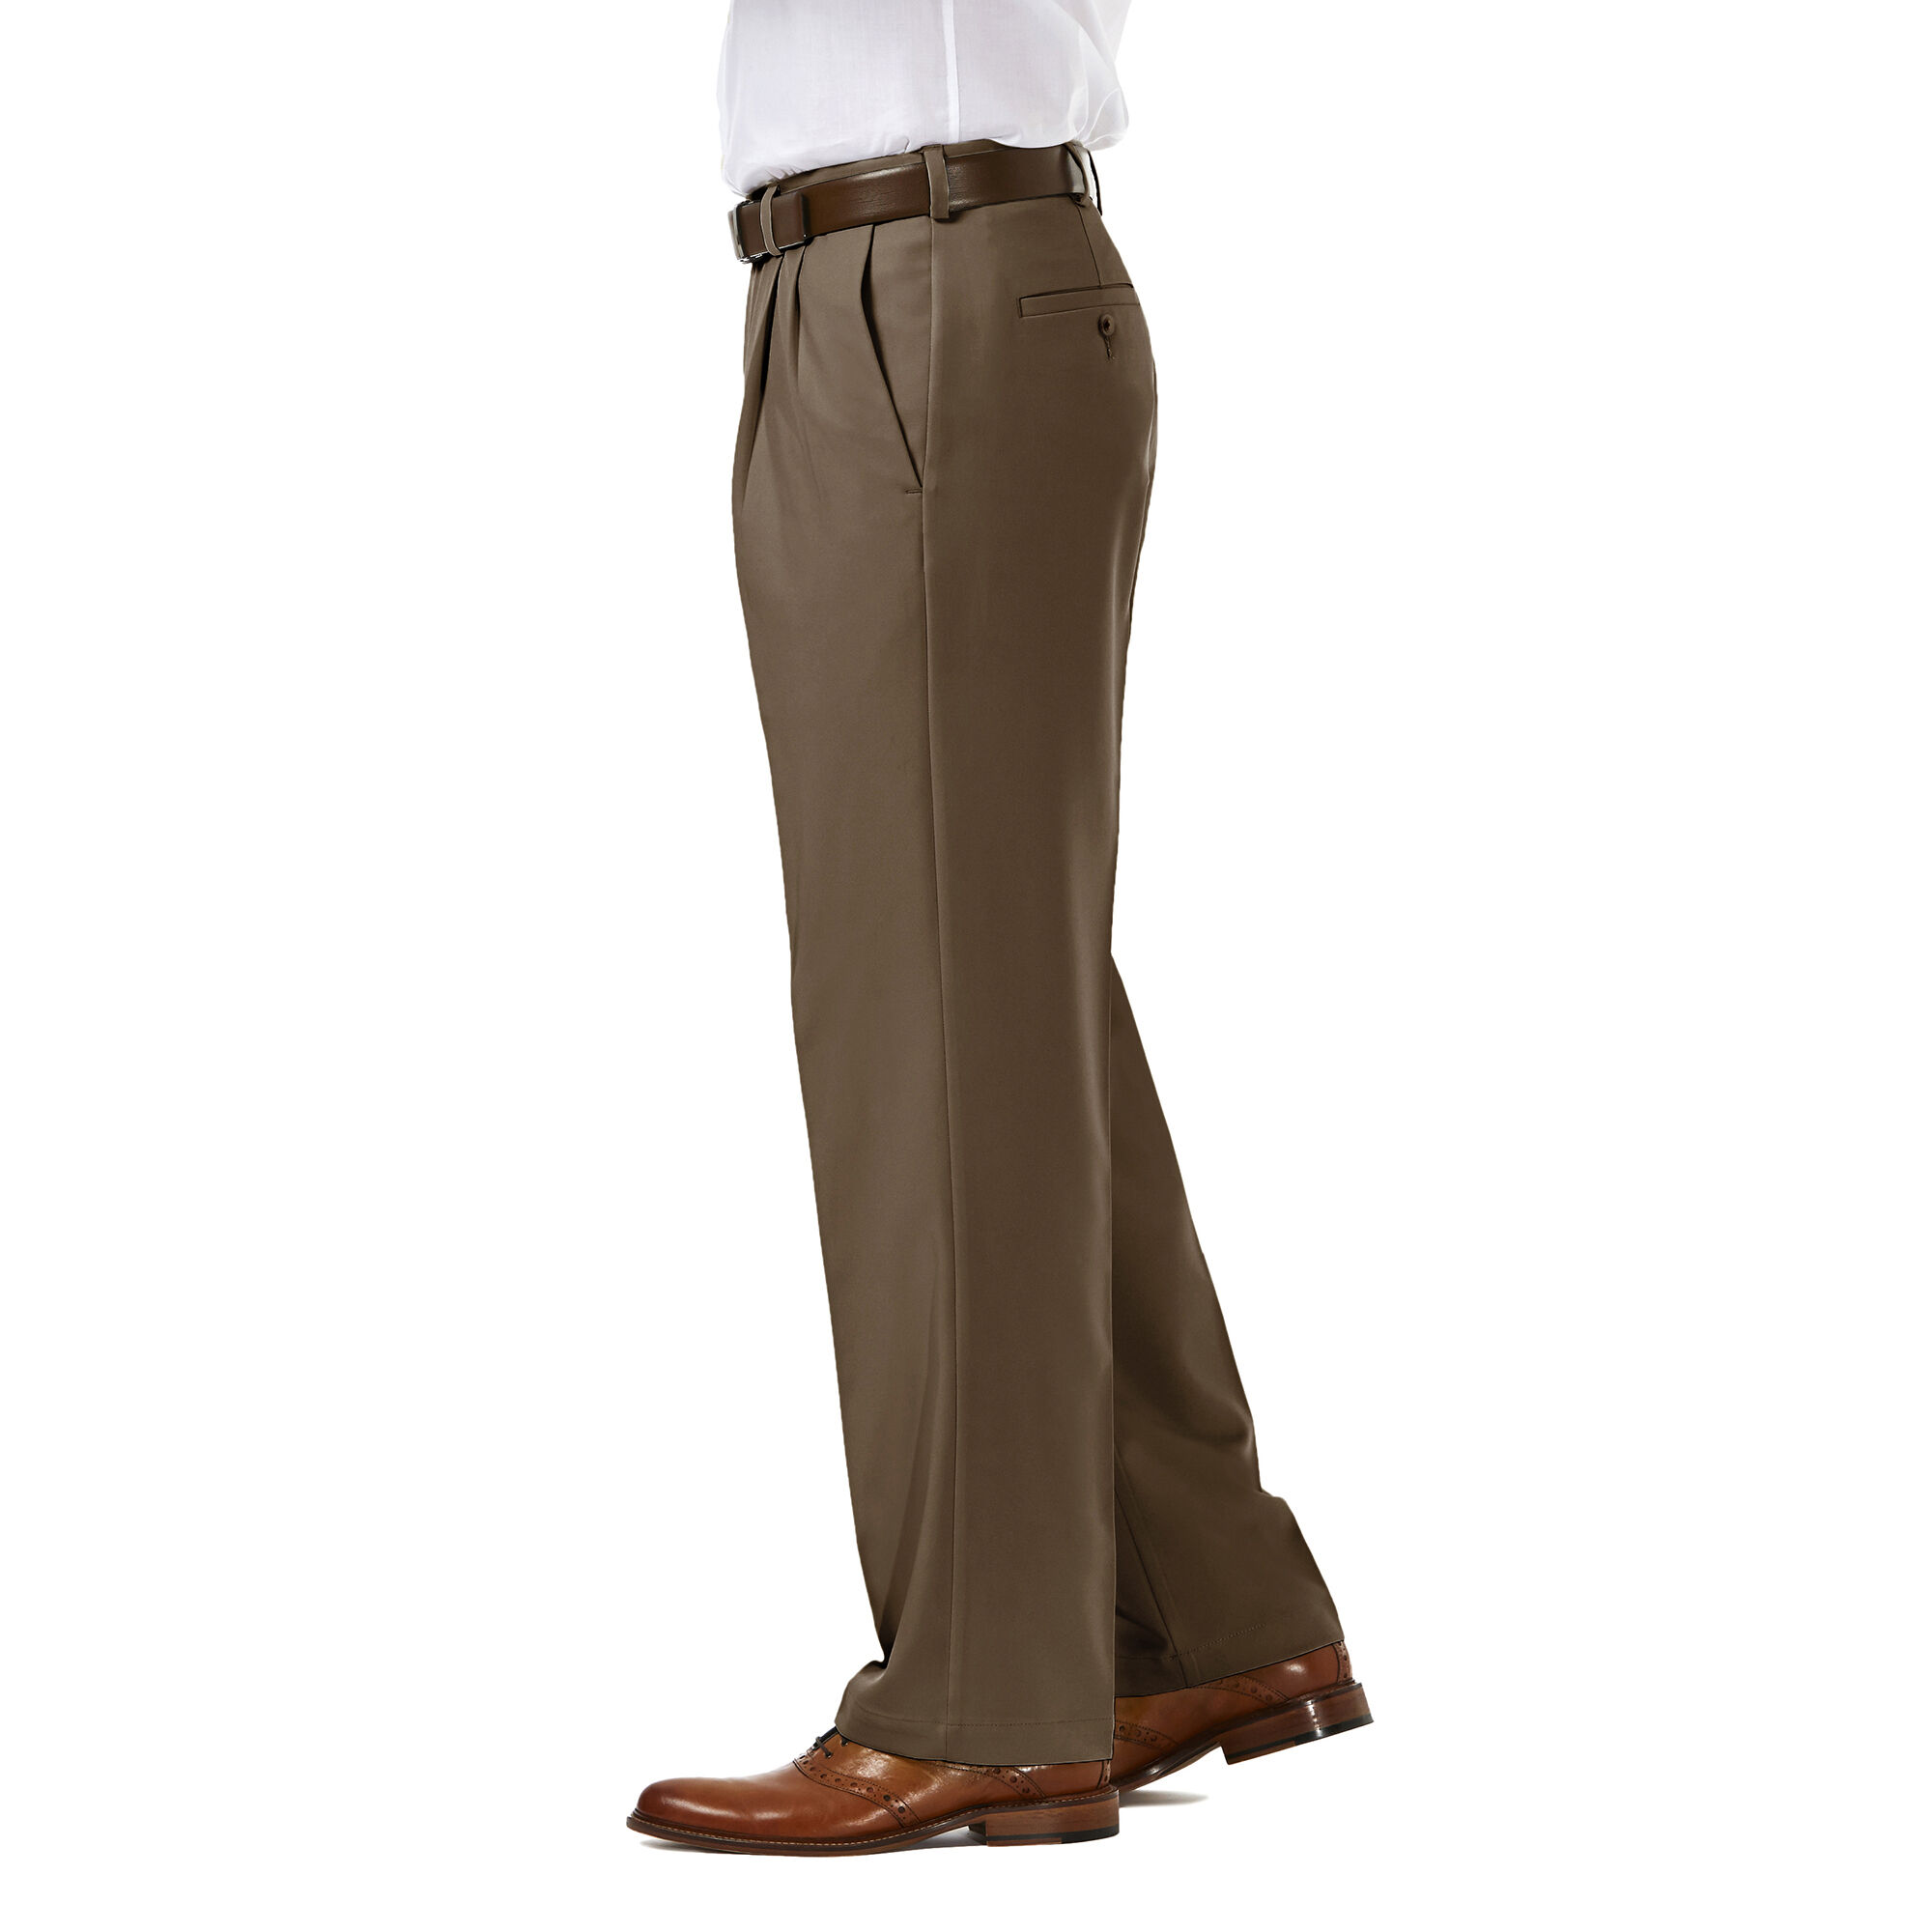 Haggar Cool 18 PRO Classic-Fit Wrinkle-Free Pleated Expandable Waist Pants 